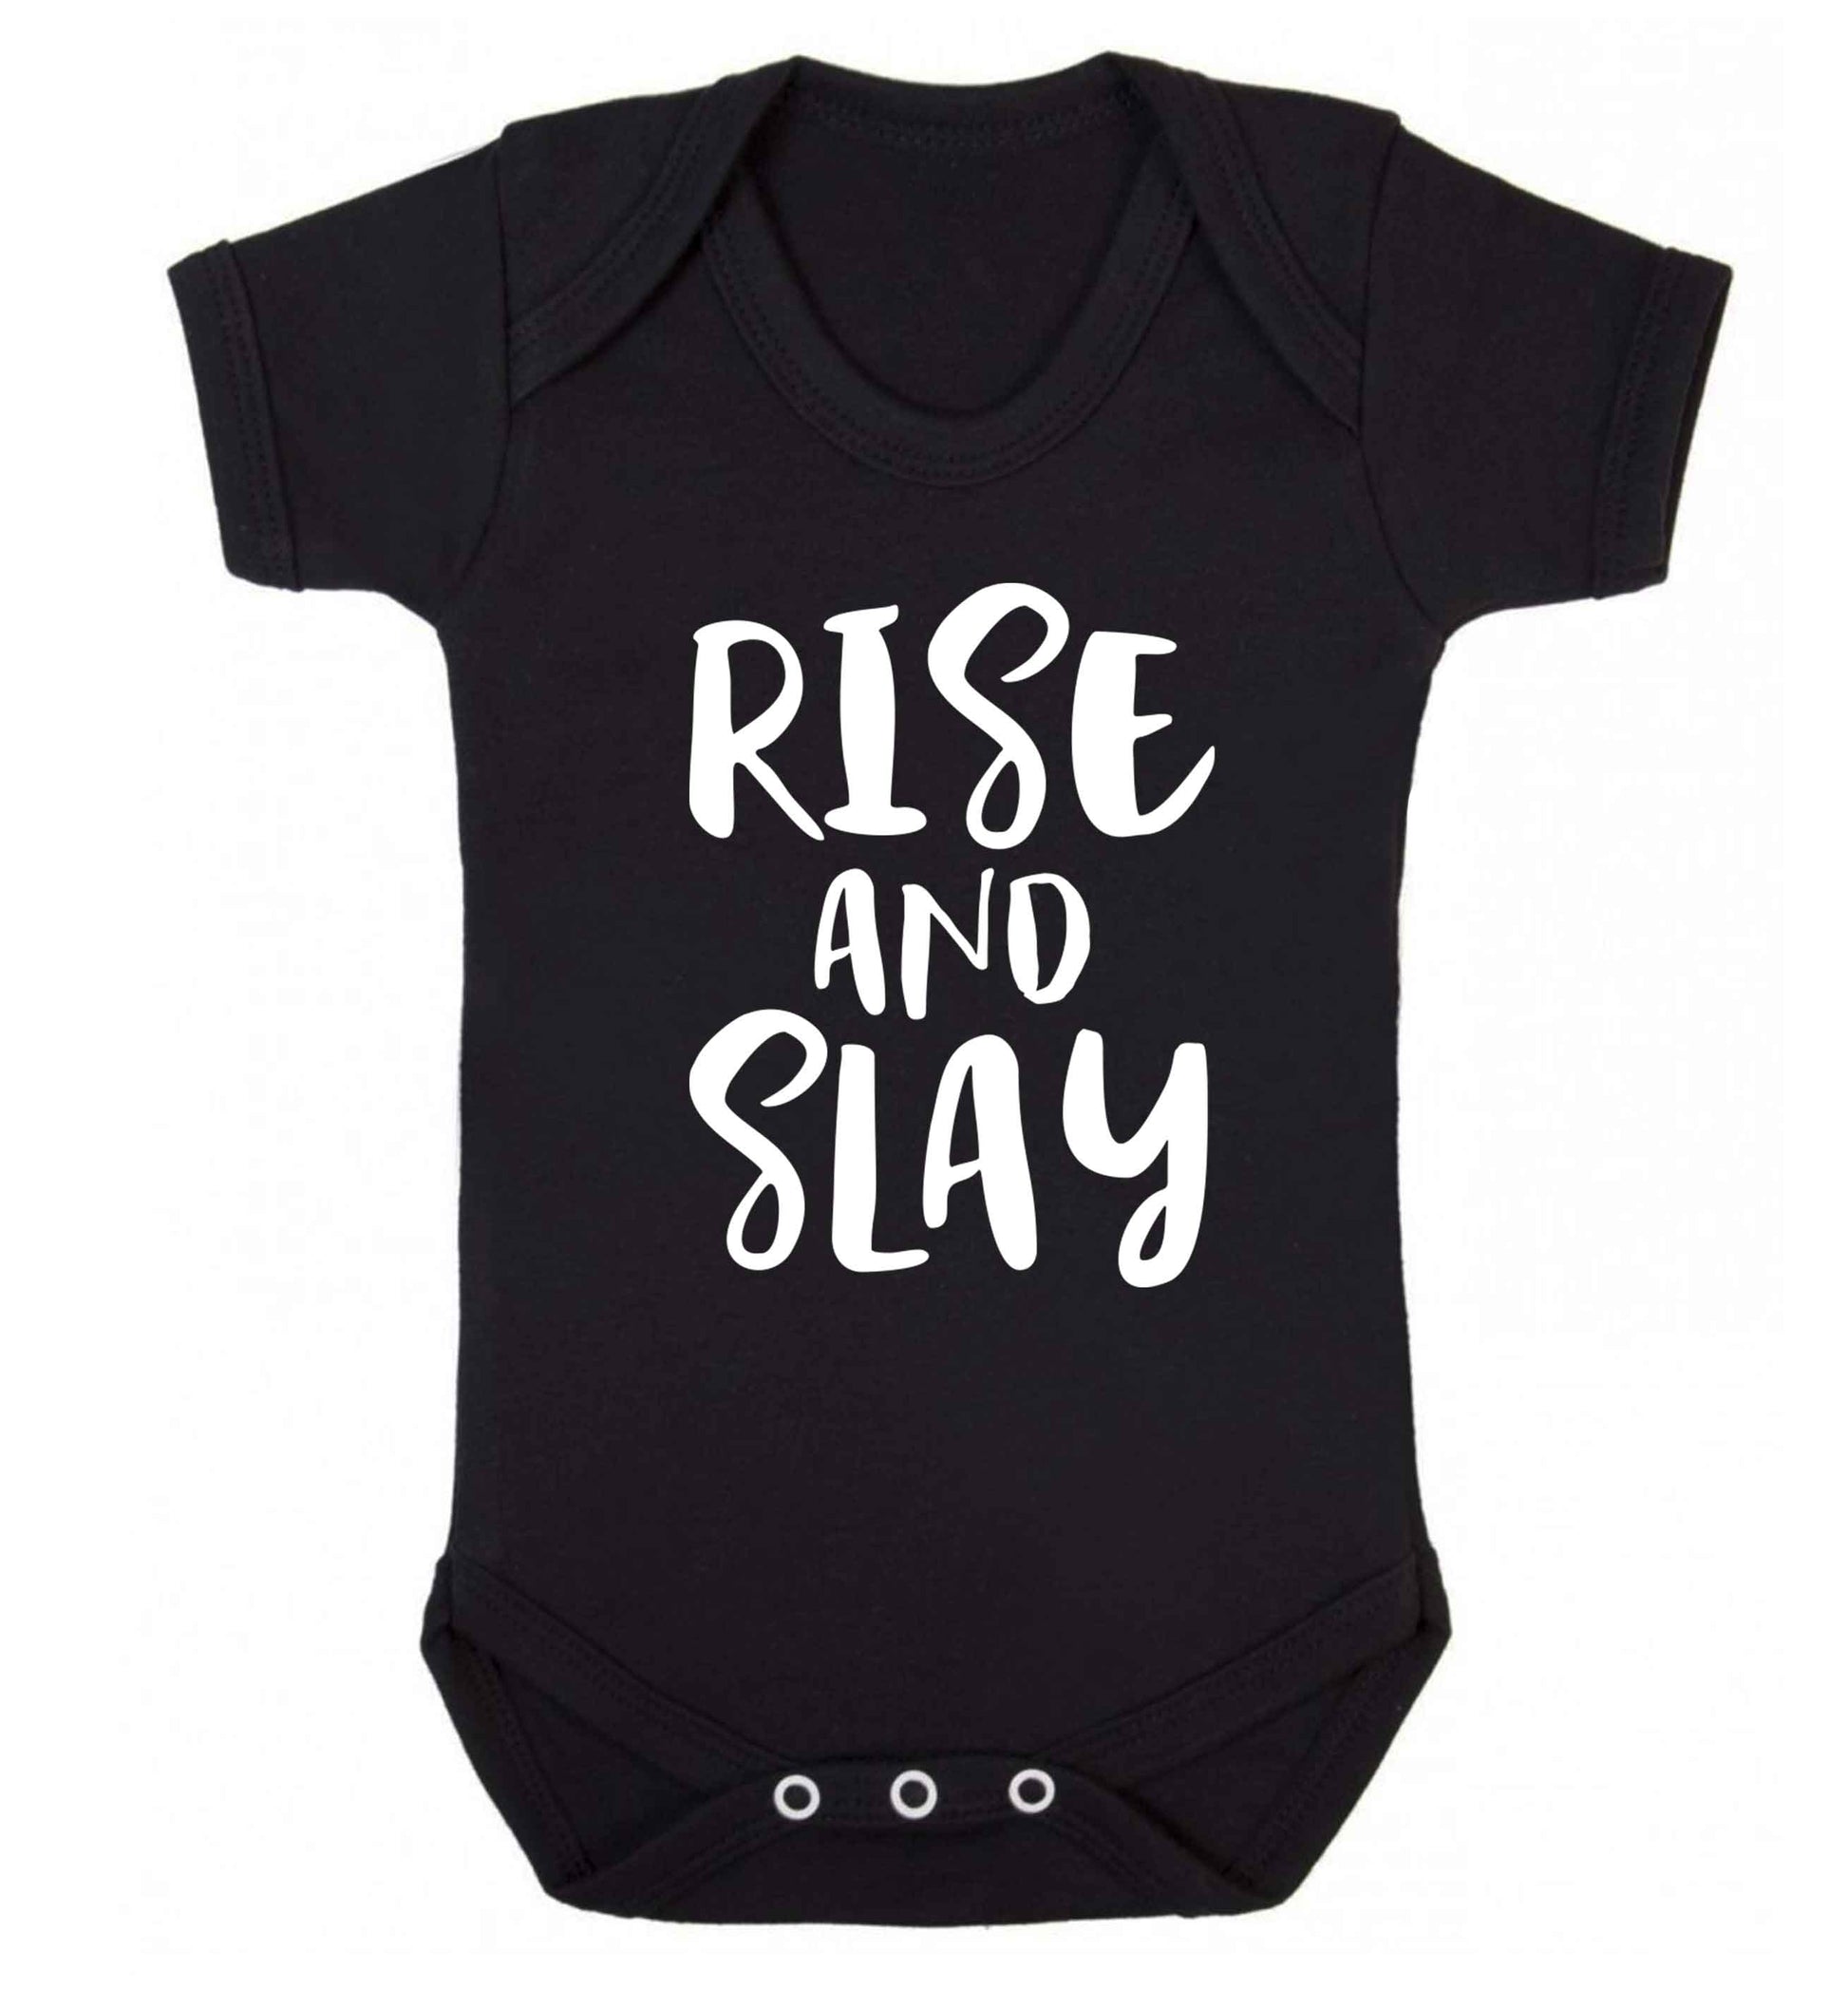 Rise and slay Baby Vest black 18-24 months